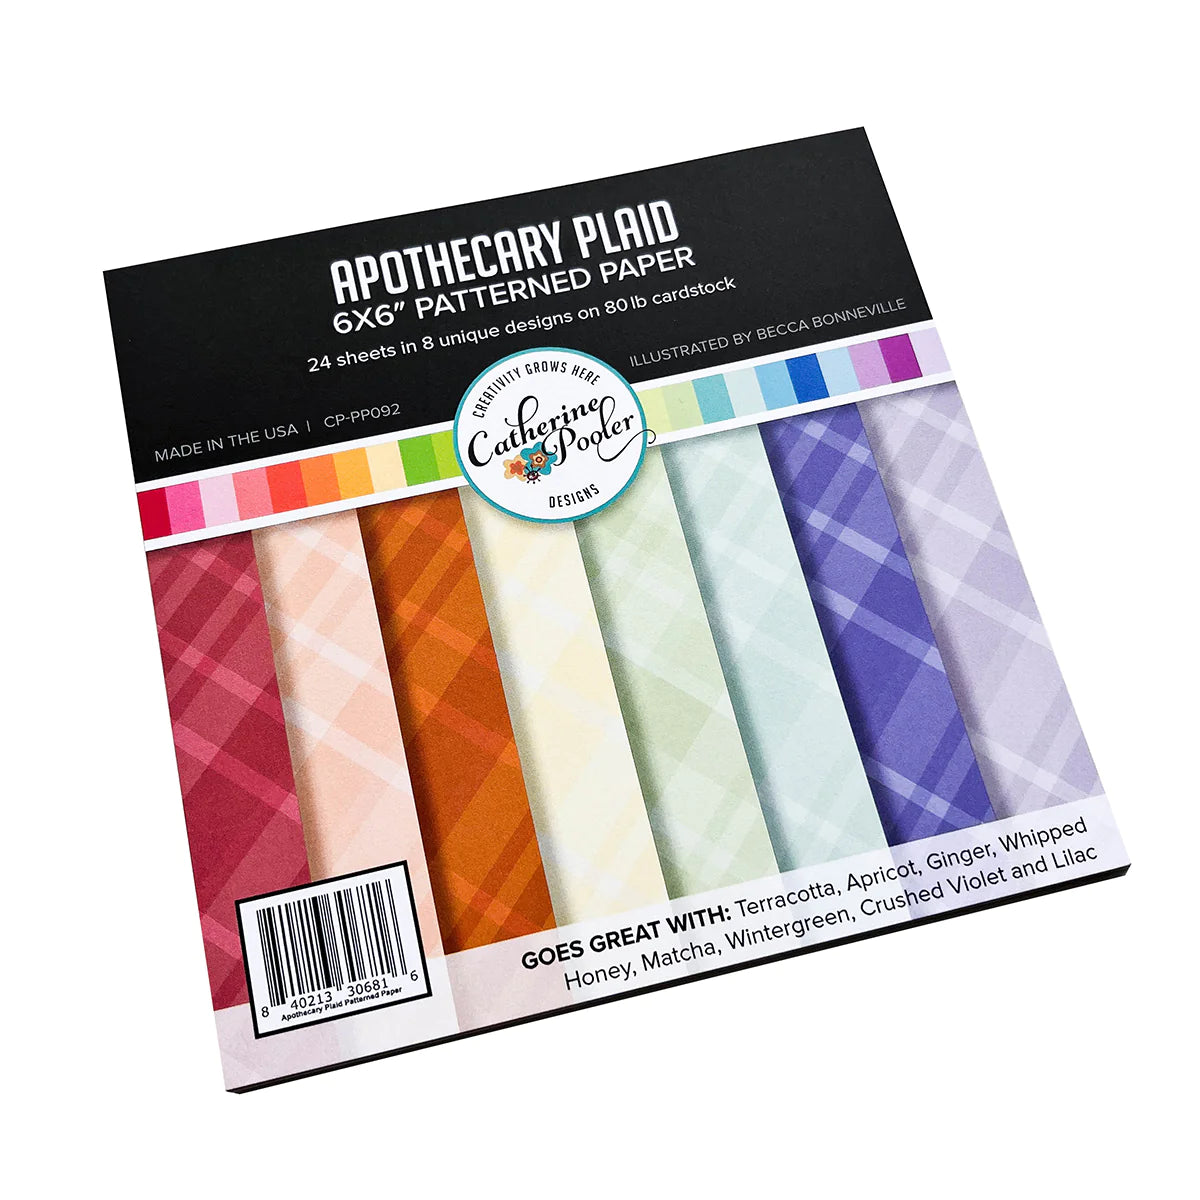 Apothecary Plaid 6"x6" Patterned Paper